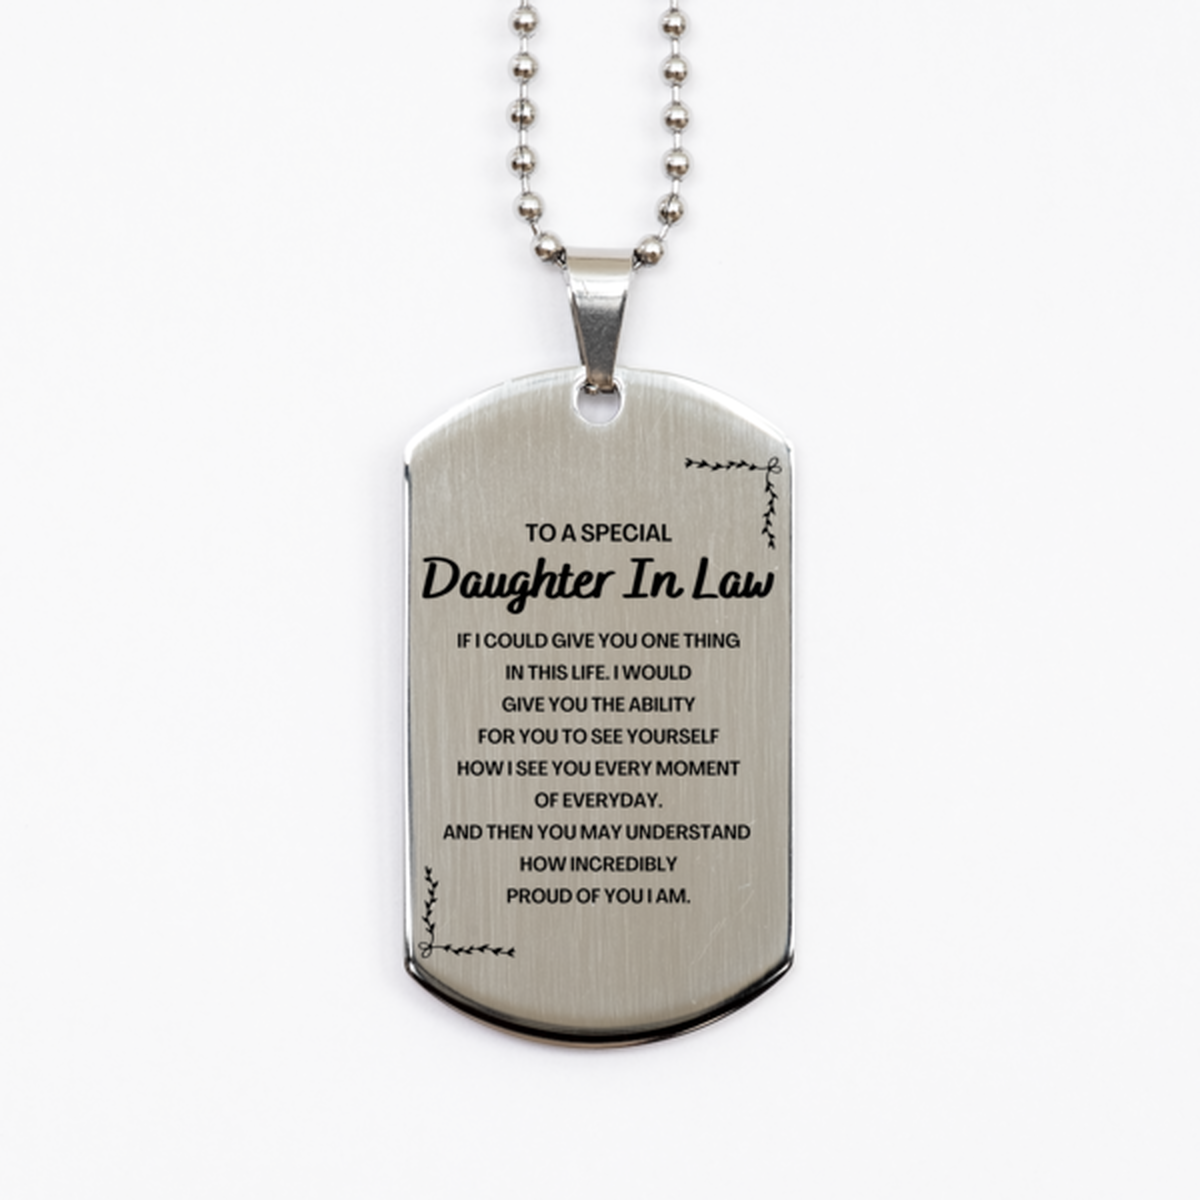 To My Daughter In Law Silver Dog Tag, Gifts For Daughter In Law Engraved, Inspirational Gifts for Christmas Birthday, Epic Gifts for Daughter In Law To A Special Daughter In Law how incredibly proud of you I am